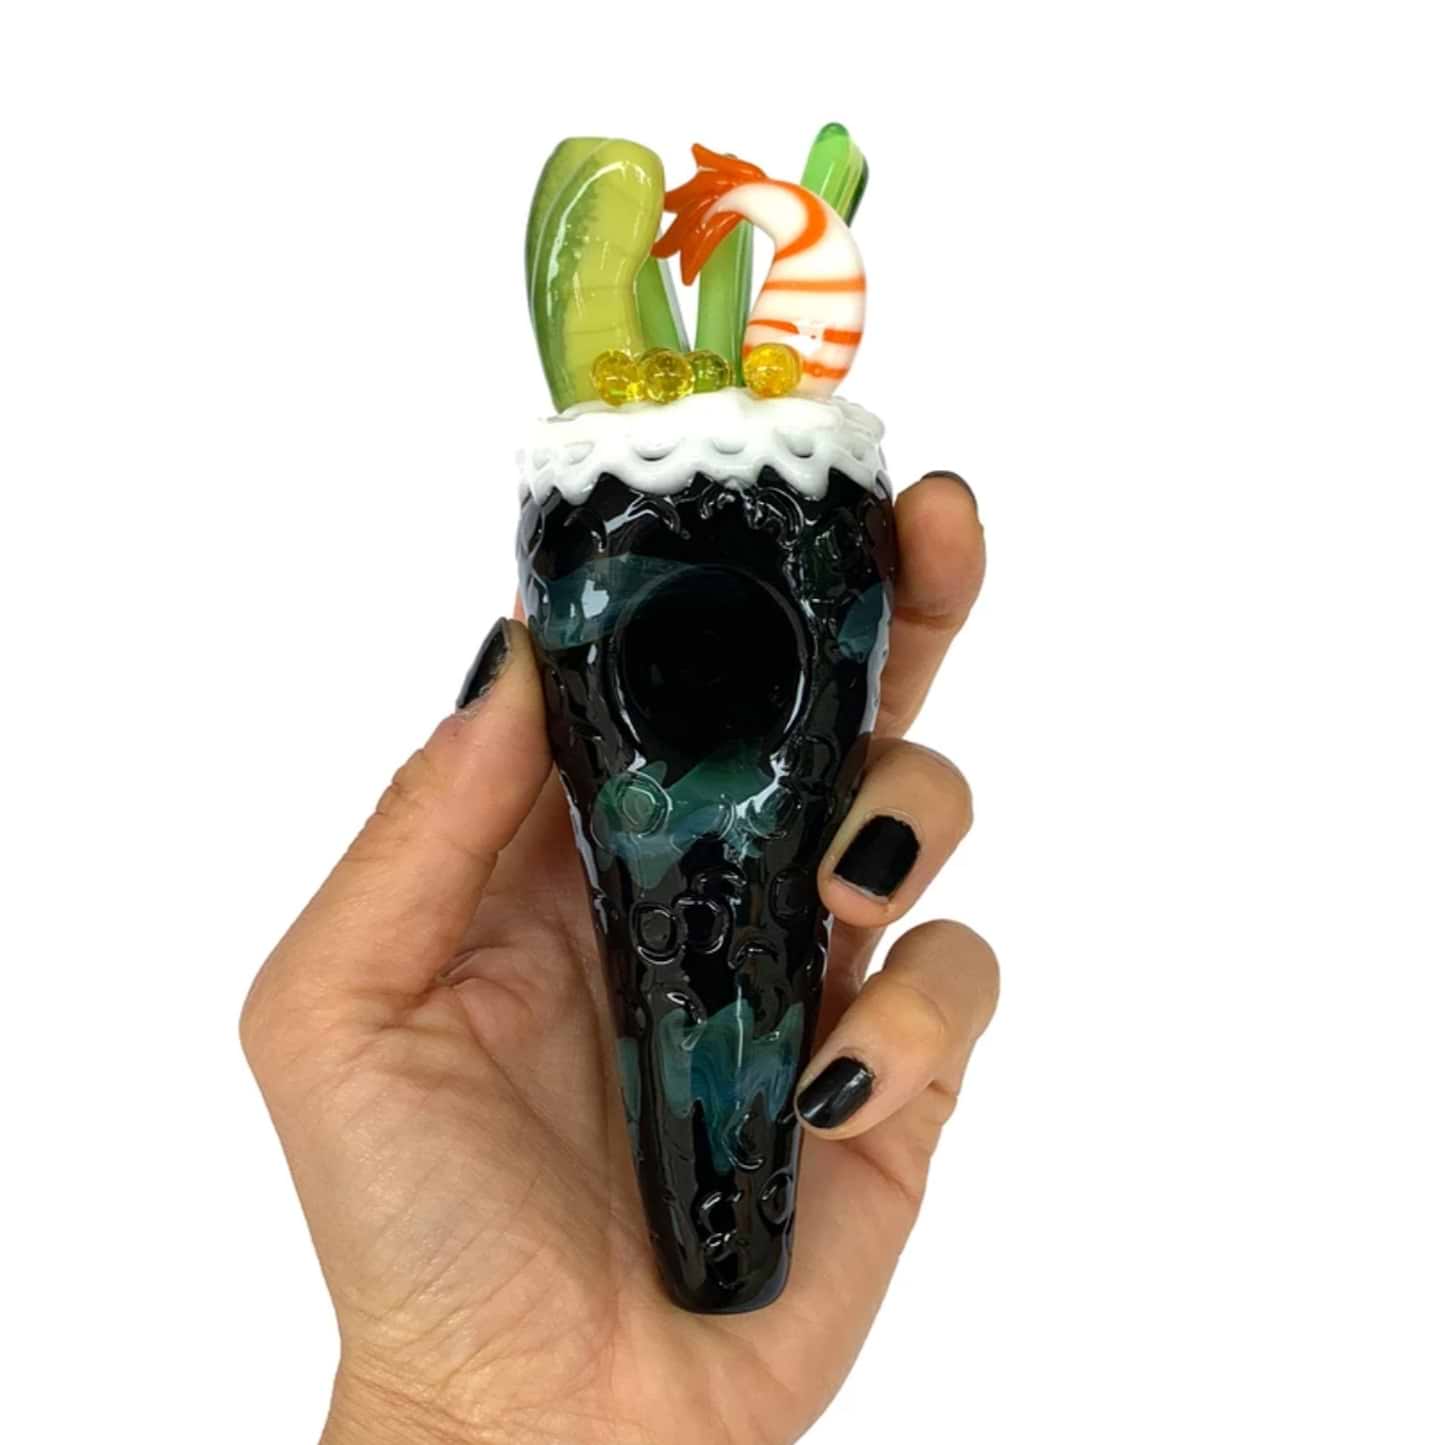 Empire Glassworks Shrimp Hand Roll Sushi Hand Pipe - 6in